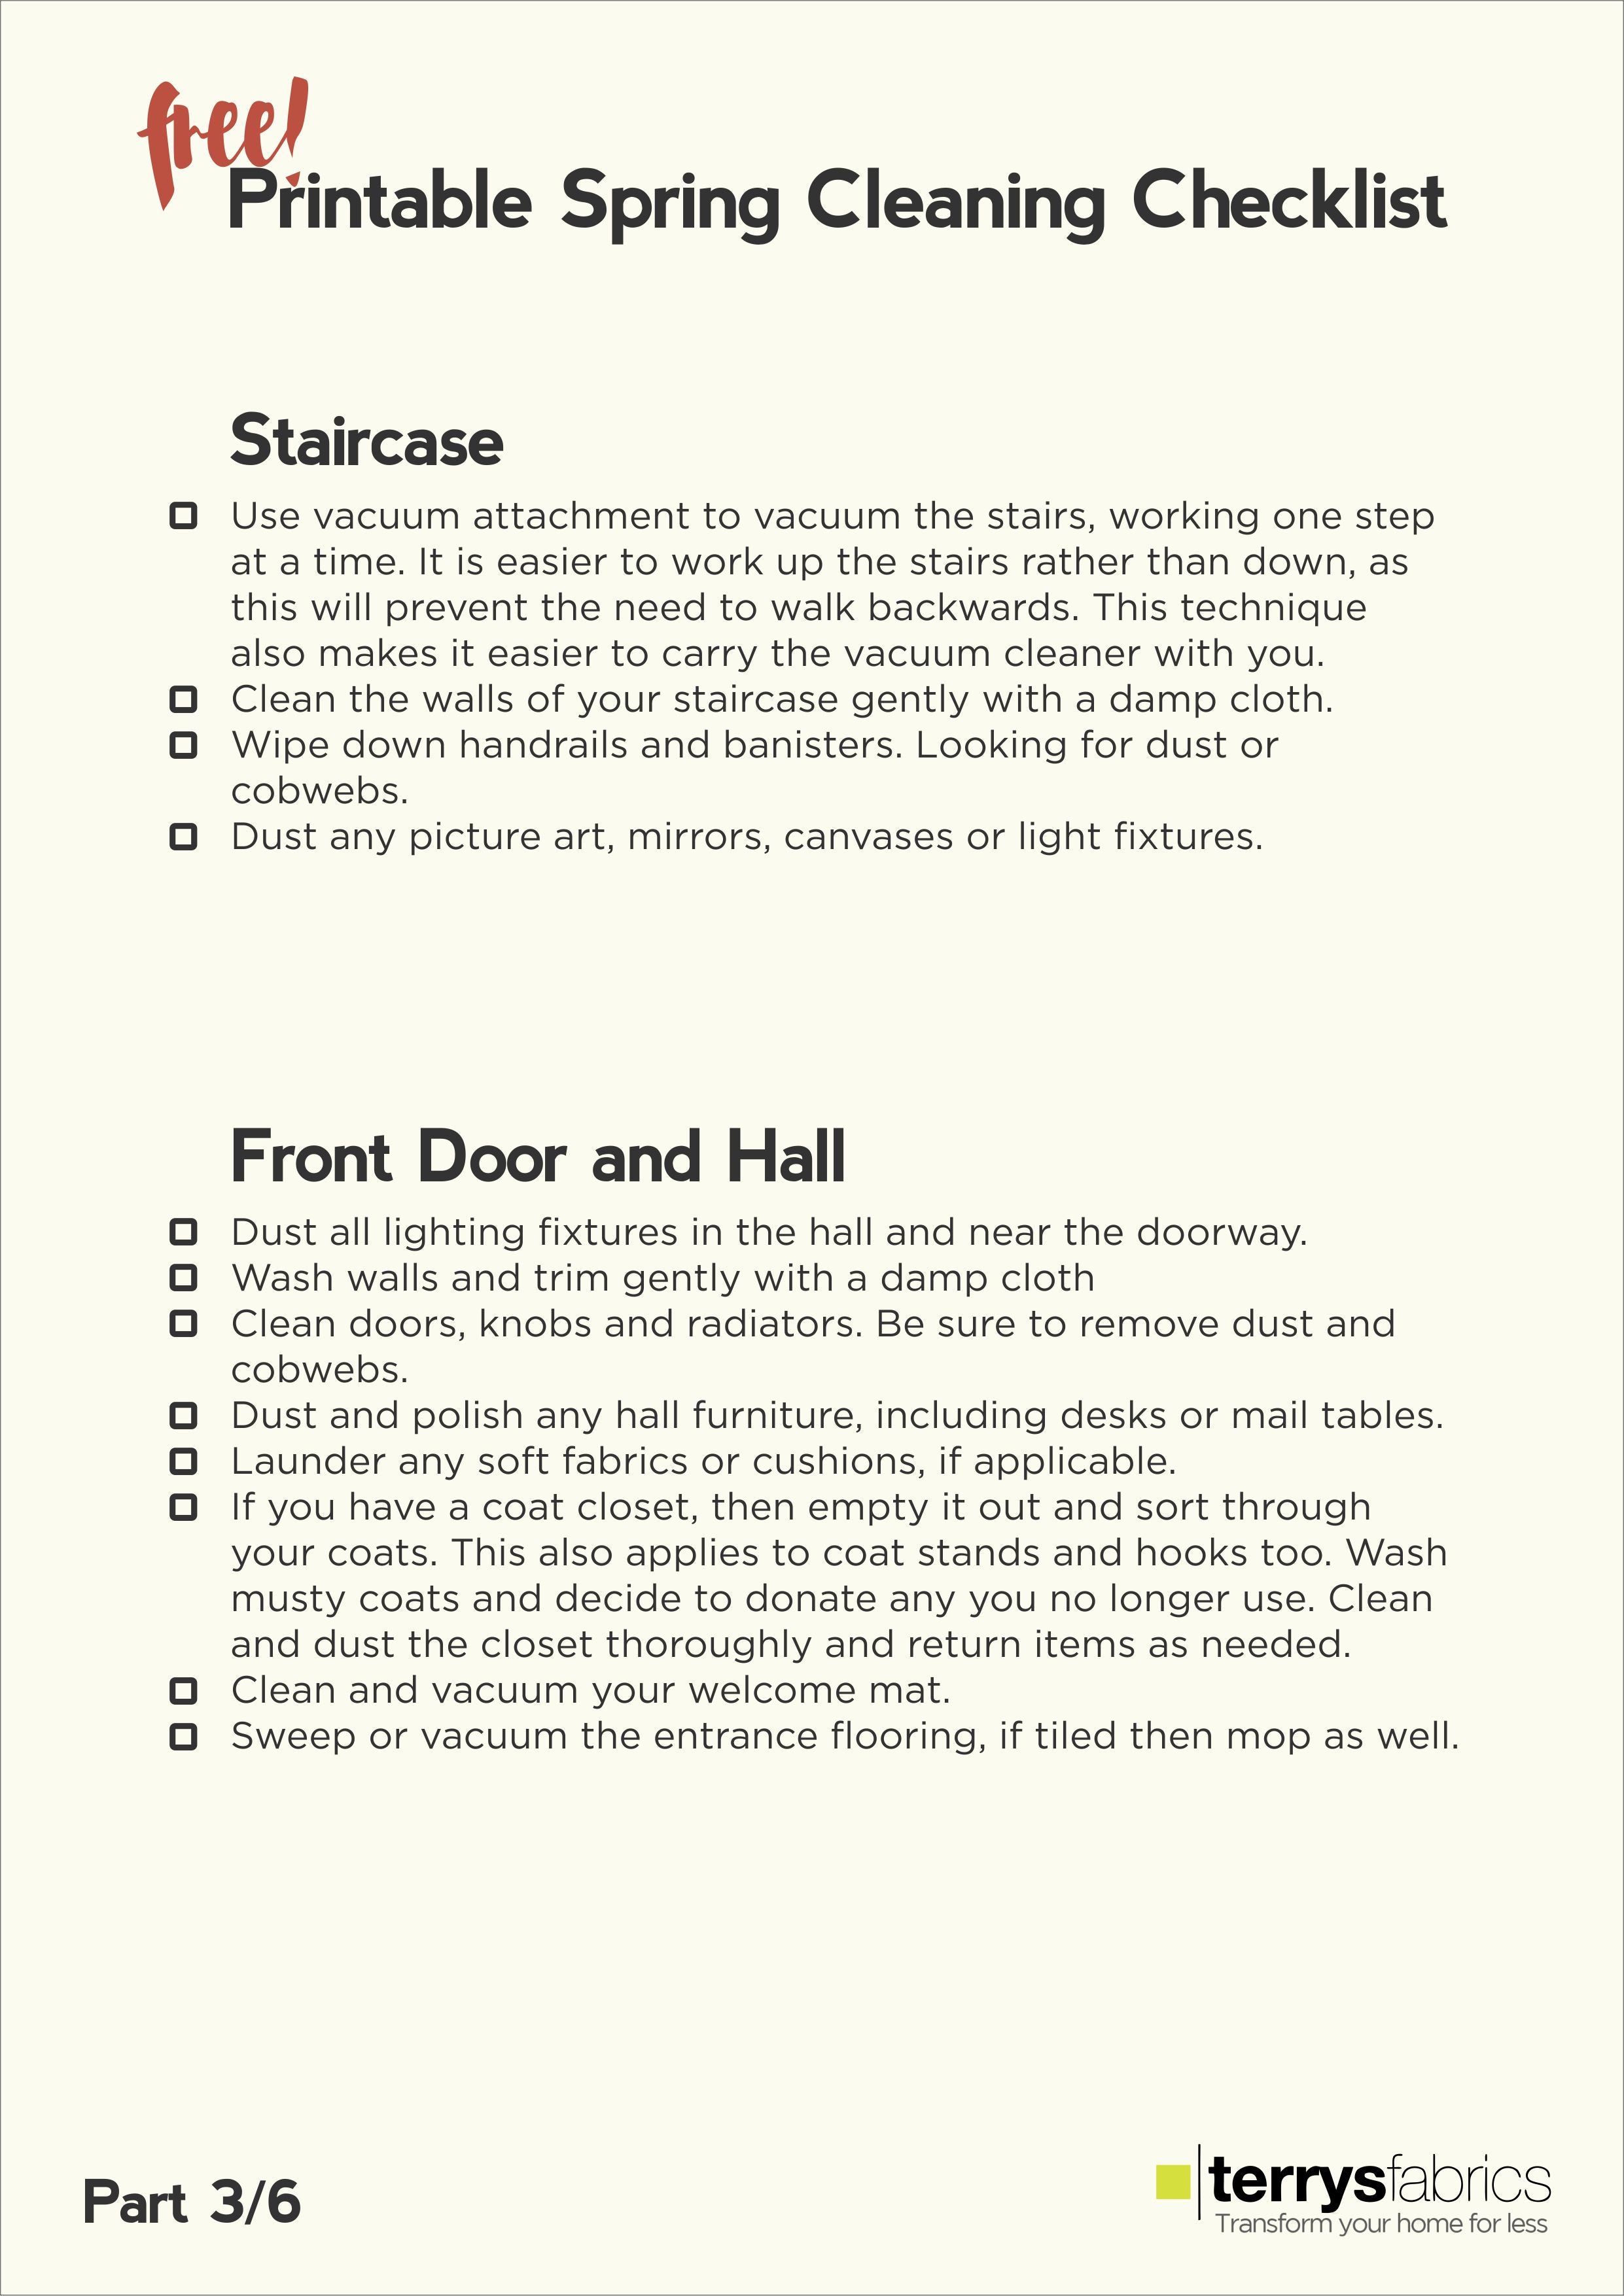 Ultimate Spring Cleaning Hall & Staircase Checklist